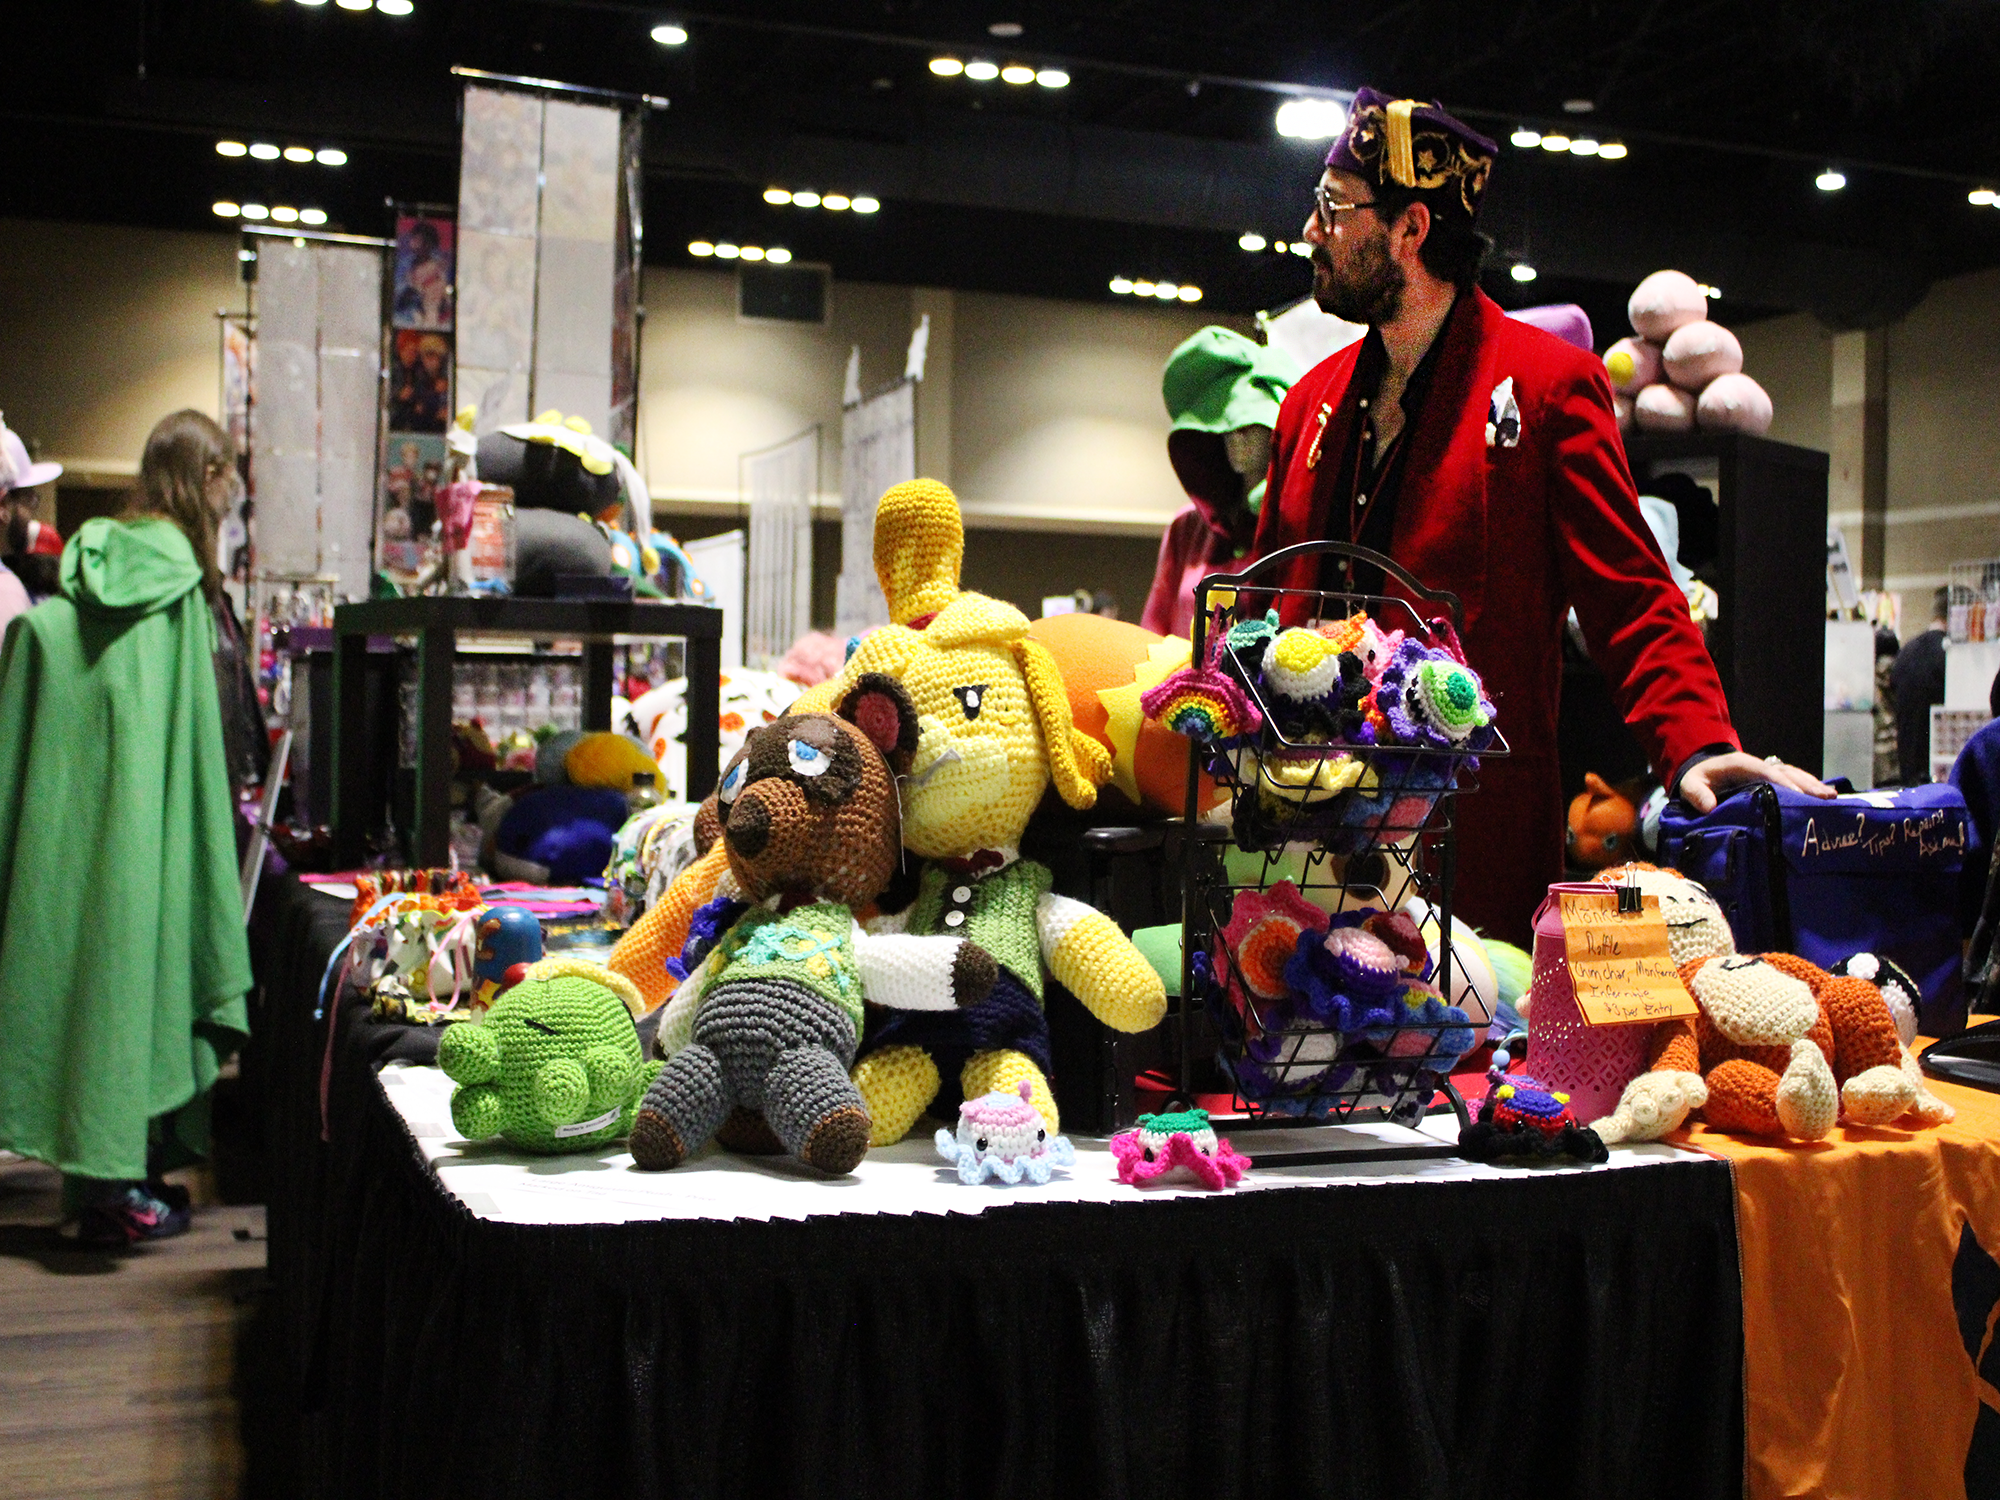 table with stuffed animals at anime convention